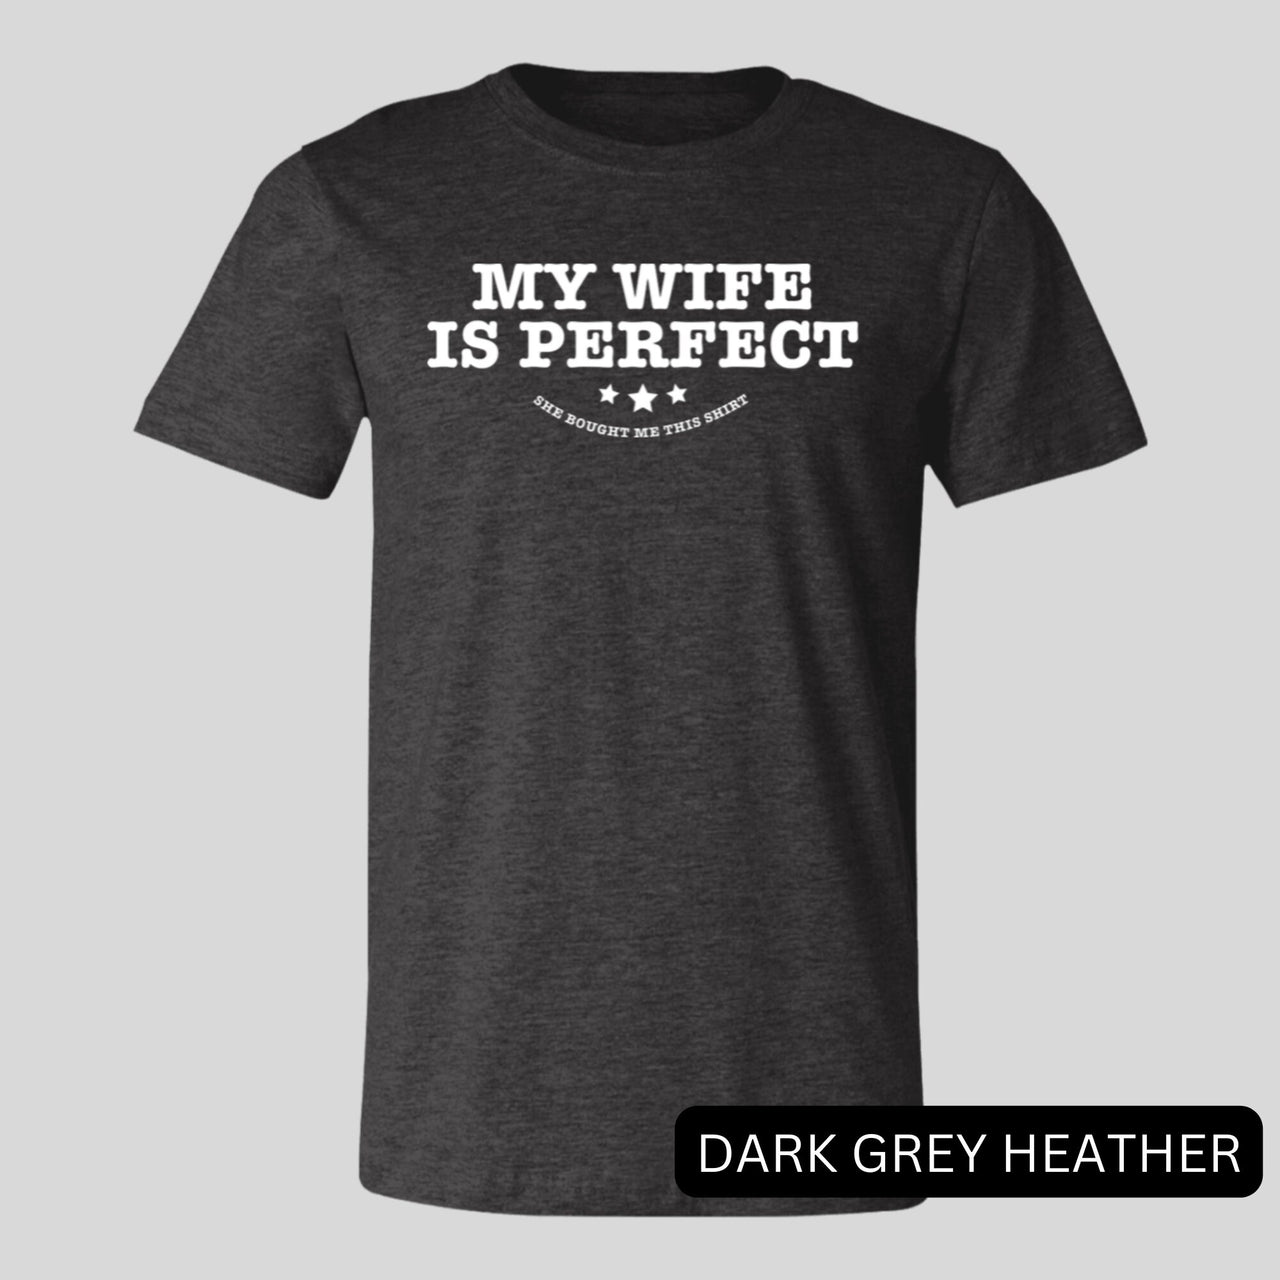 My Wife is Perfect T-Shirt